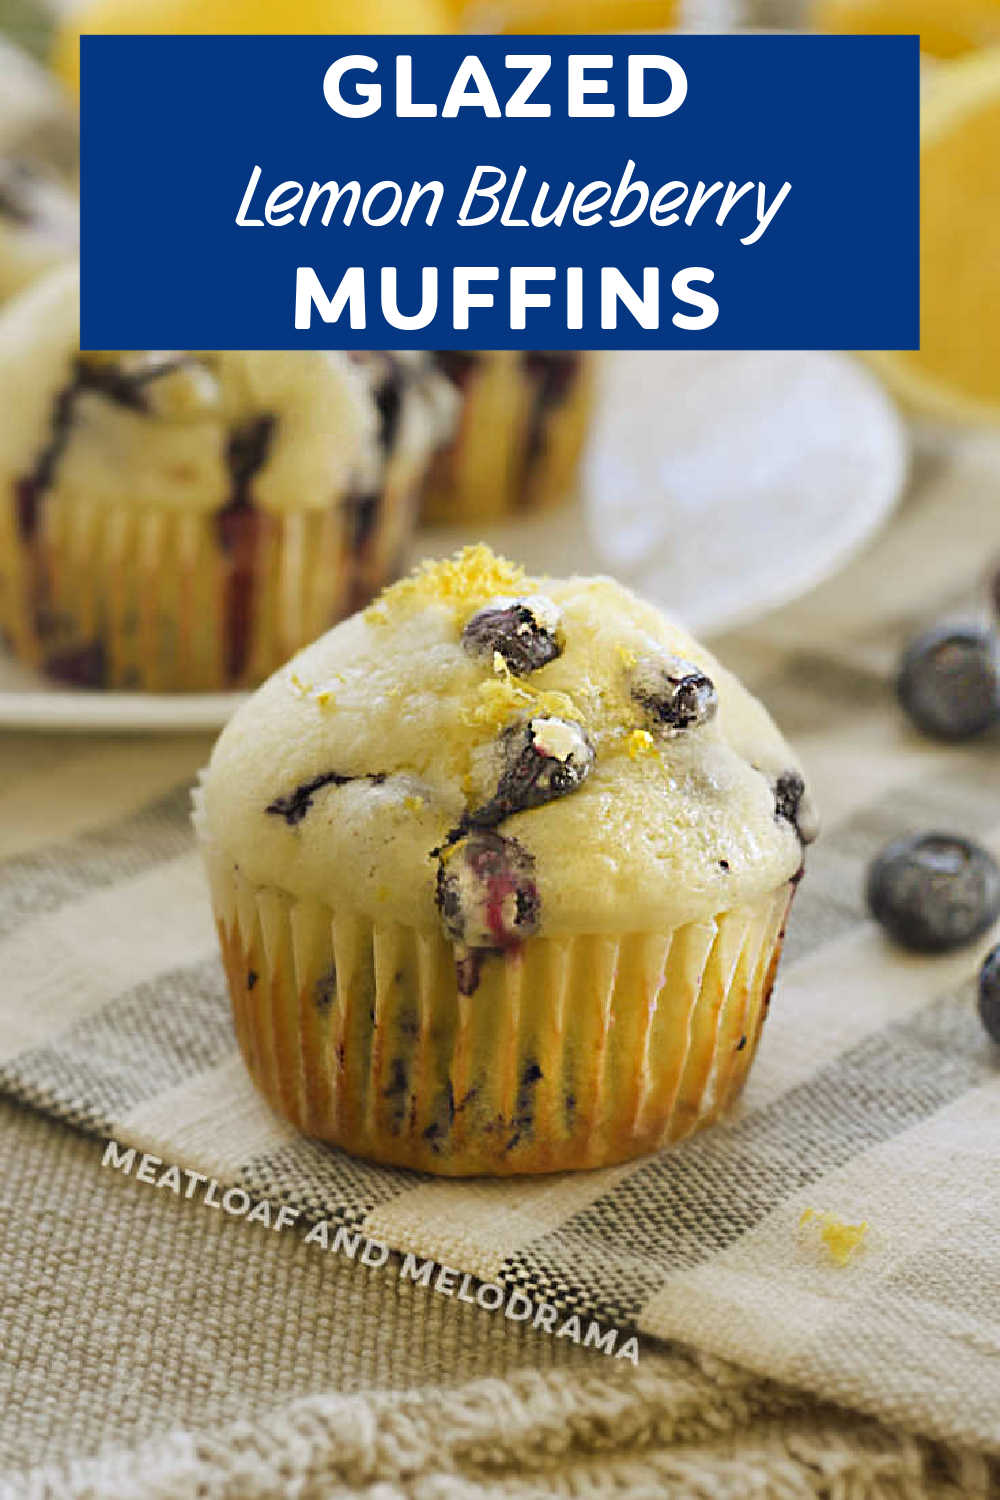 This Glazed Lemon Blueberry Muffins recipe with fresh blueberries, lemon zest and a sweet lemon glaze makes the best blueberry muffins. These delicious muffins are moist, fluffy and super easy to make!  via @meamel